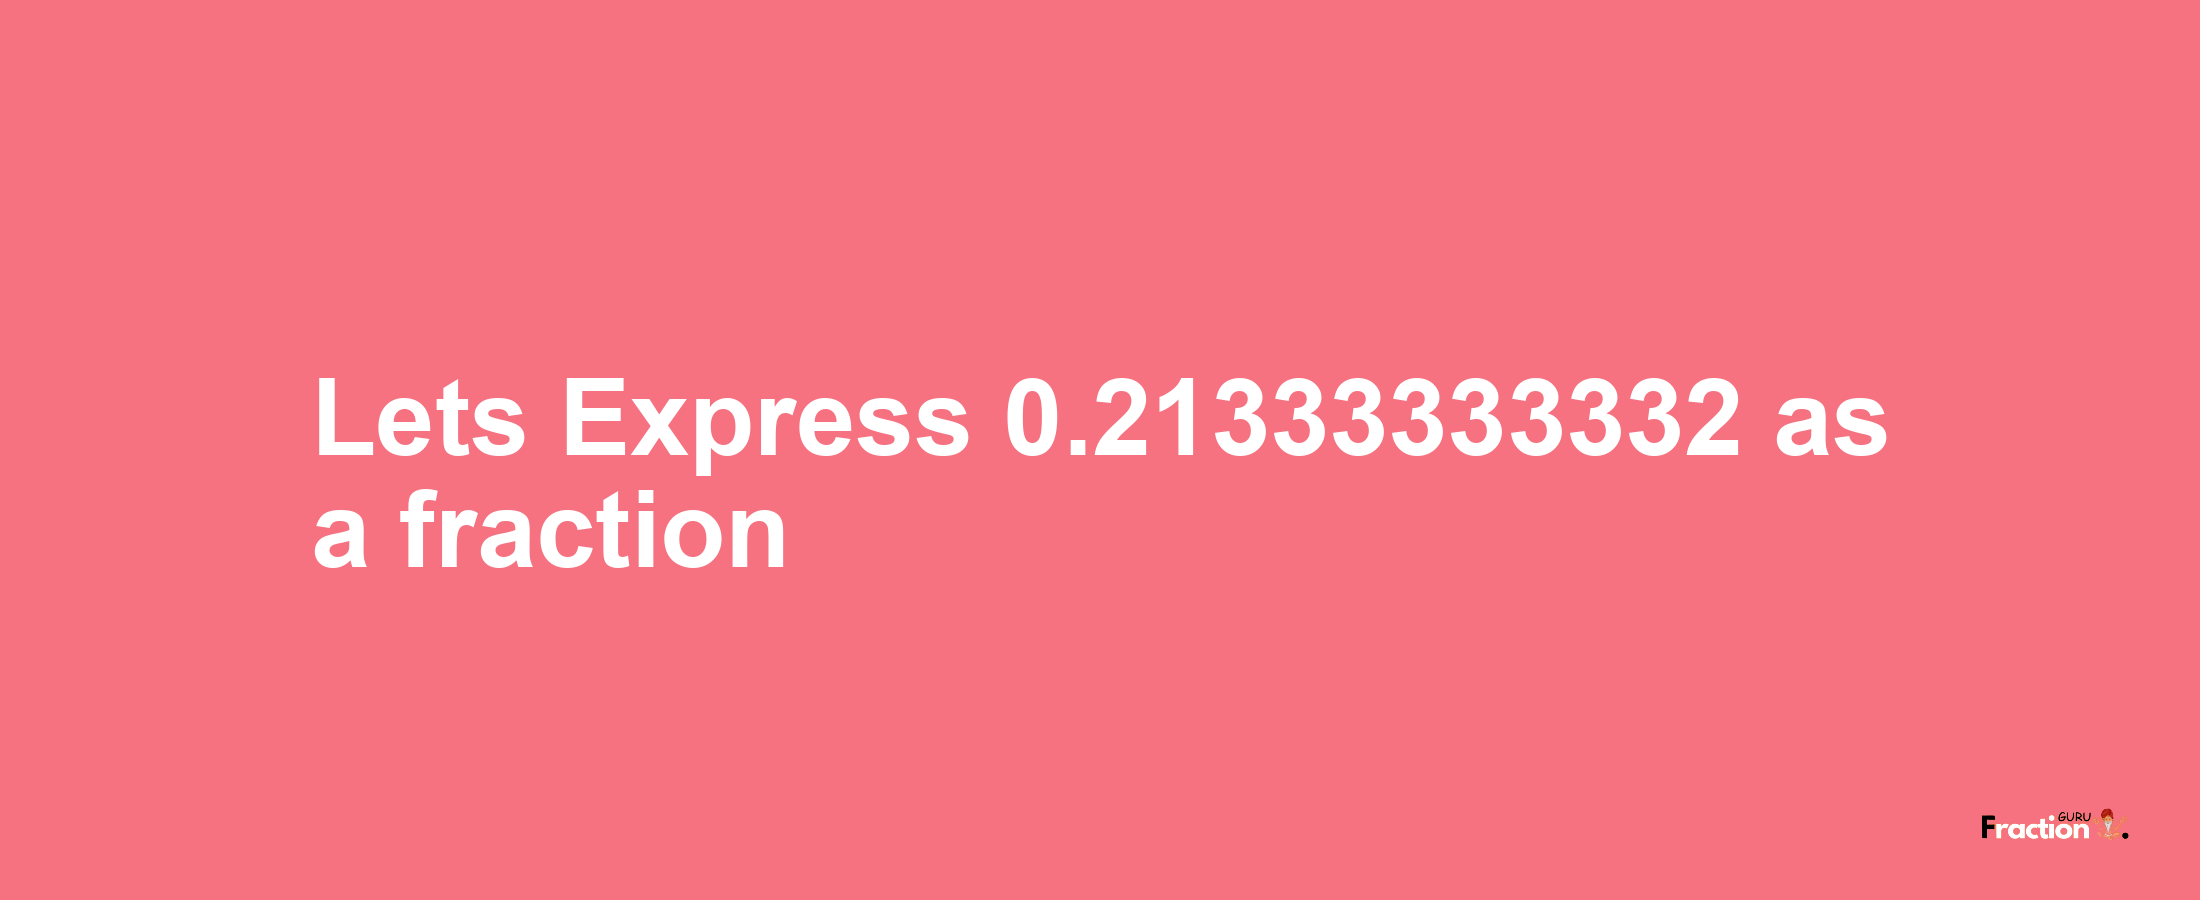 Lets Express 0.21333333332 as afraction